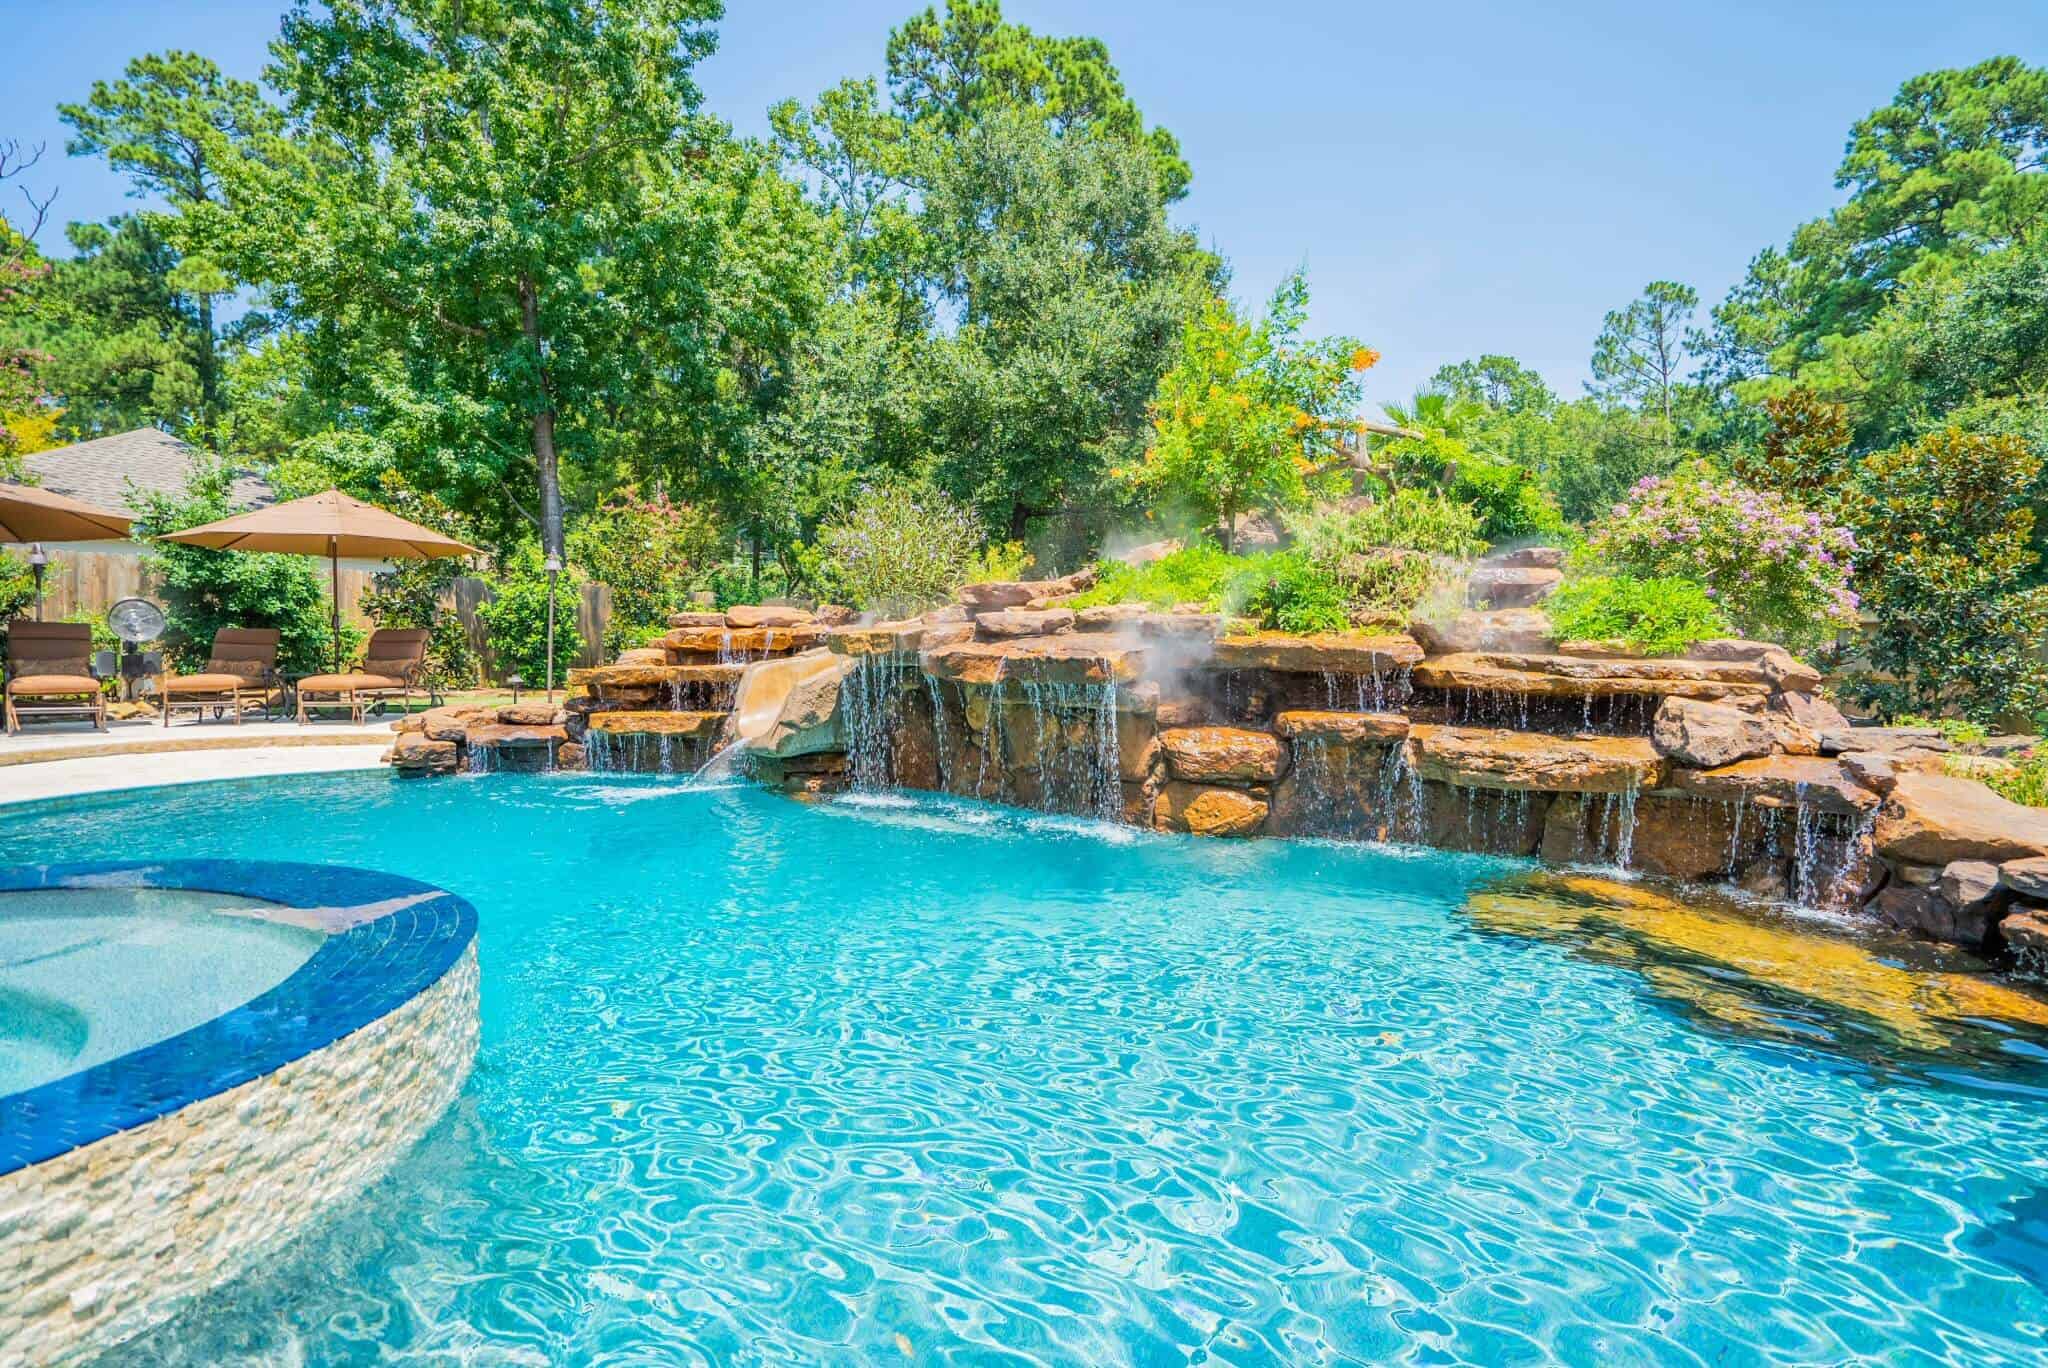 Swimming Pool Remodel - Berry Blossom by Marquise Pools, Houston, Texas